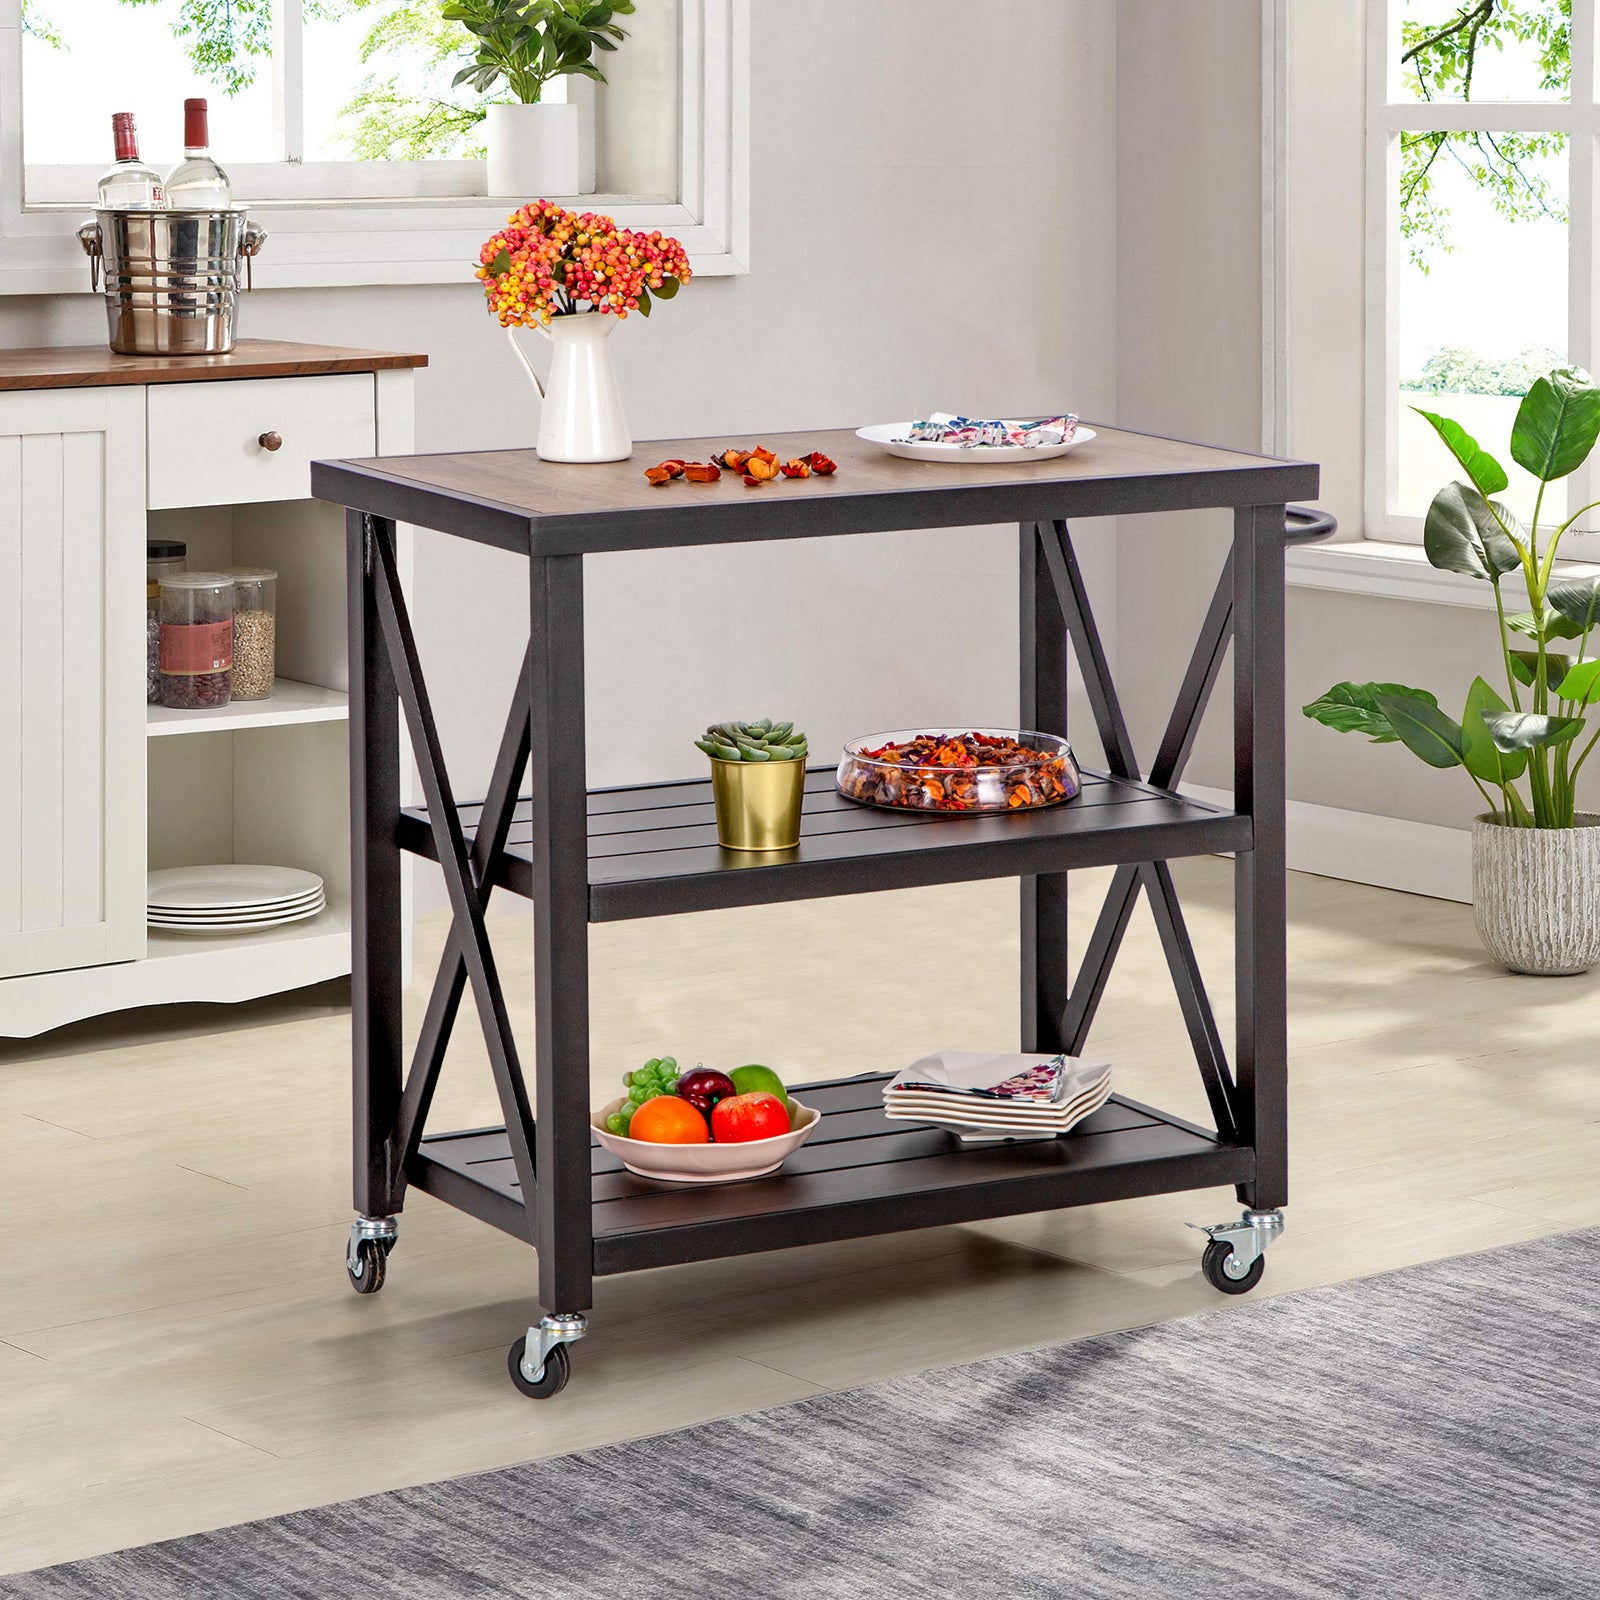 PHI VILLA Mobile 3-Tier Kitchen Cart with Metal Frames, For Outdoor and Indoor Use